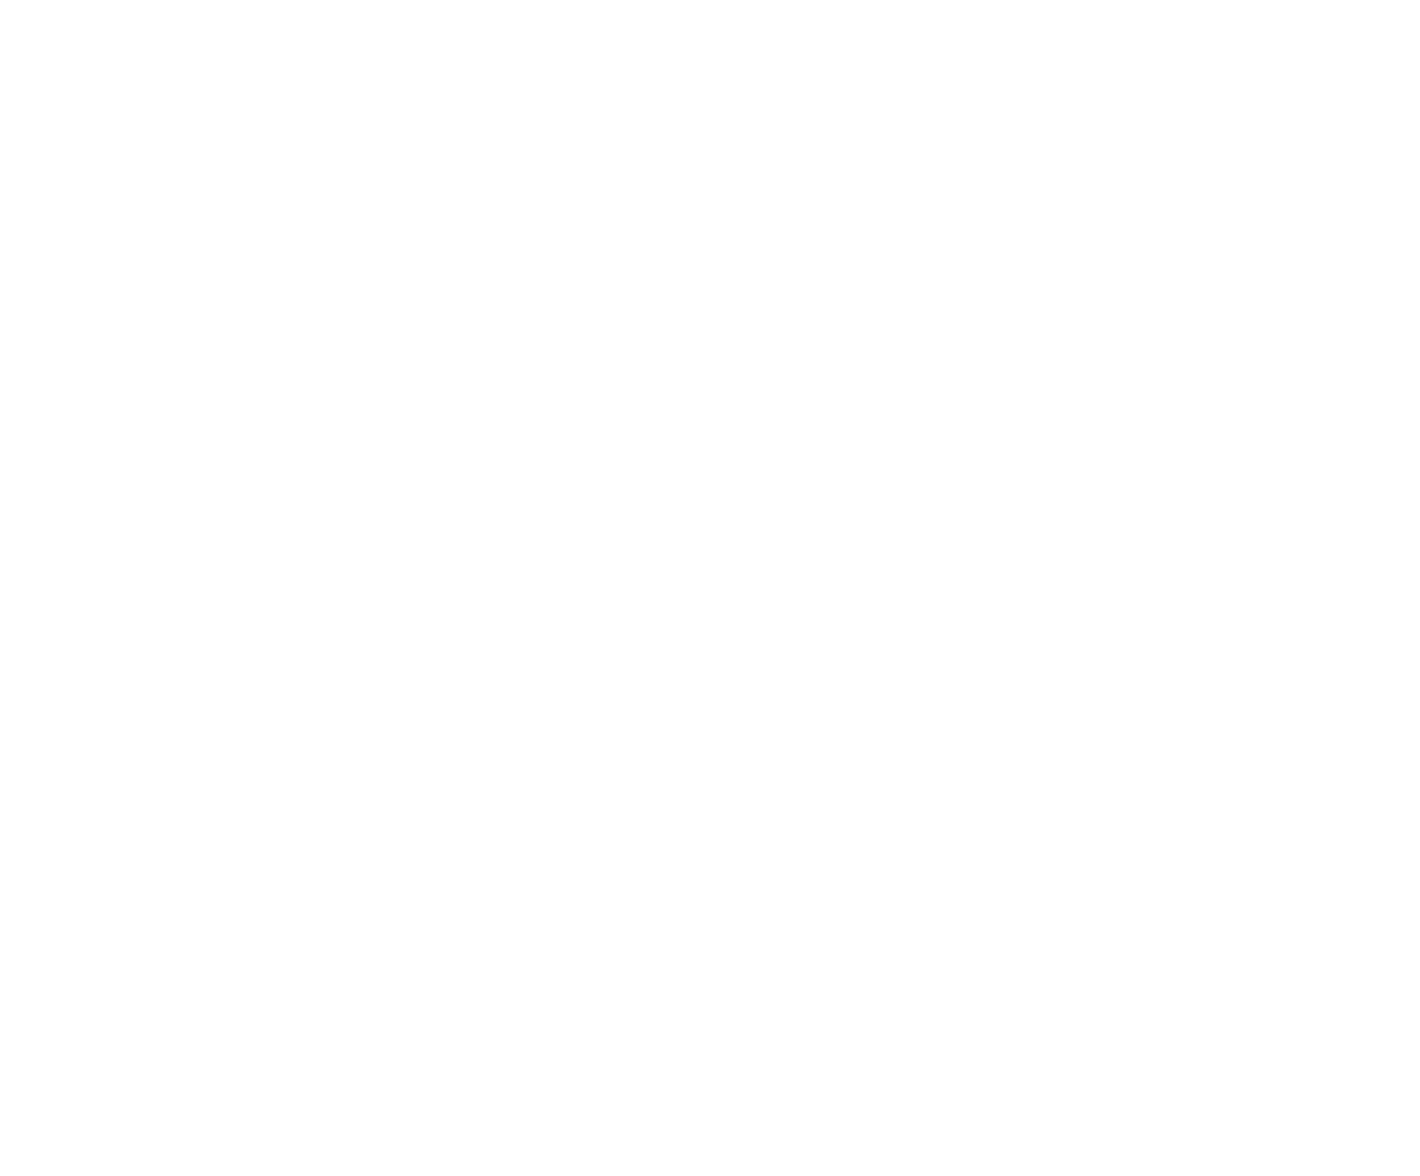 Awings Photography & Video Online